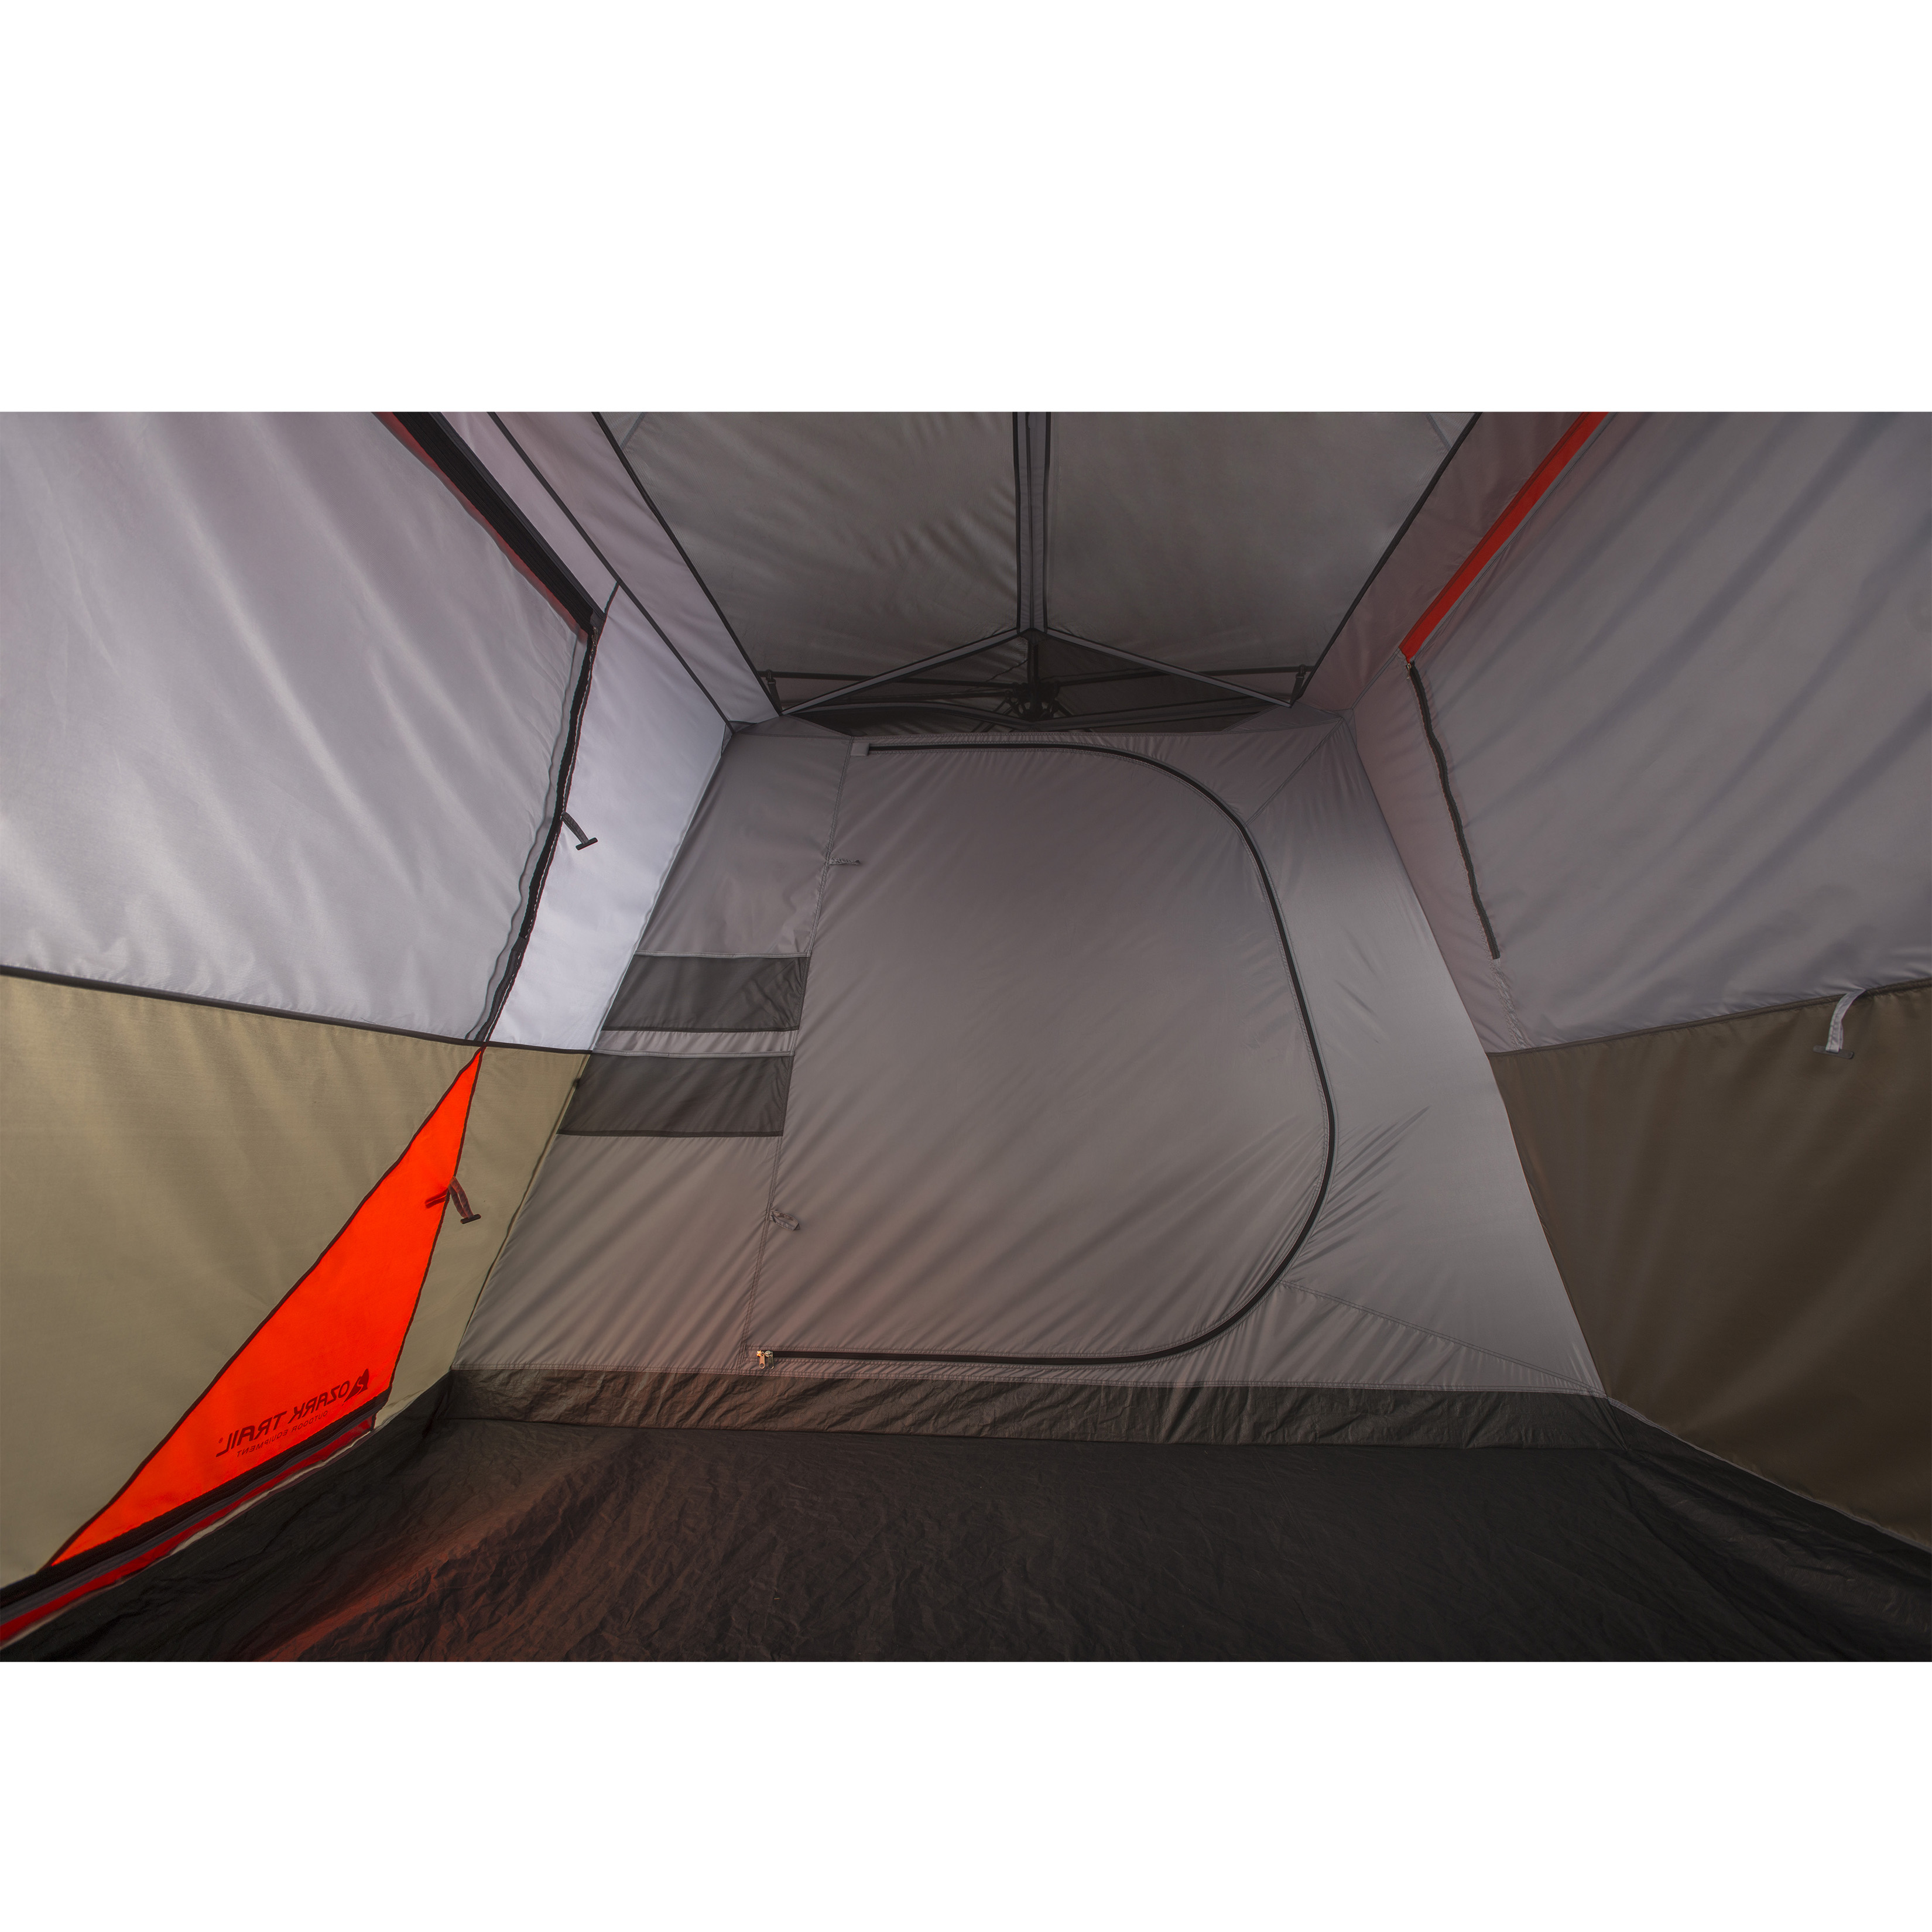 Ozark Trail 16' x 16' Instant Cabin Tent, Sleeps 12, 55.2 lbs - image 5 of 10